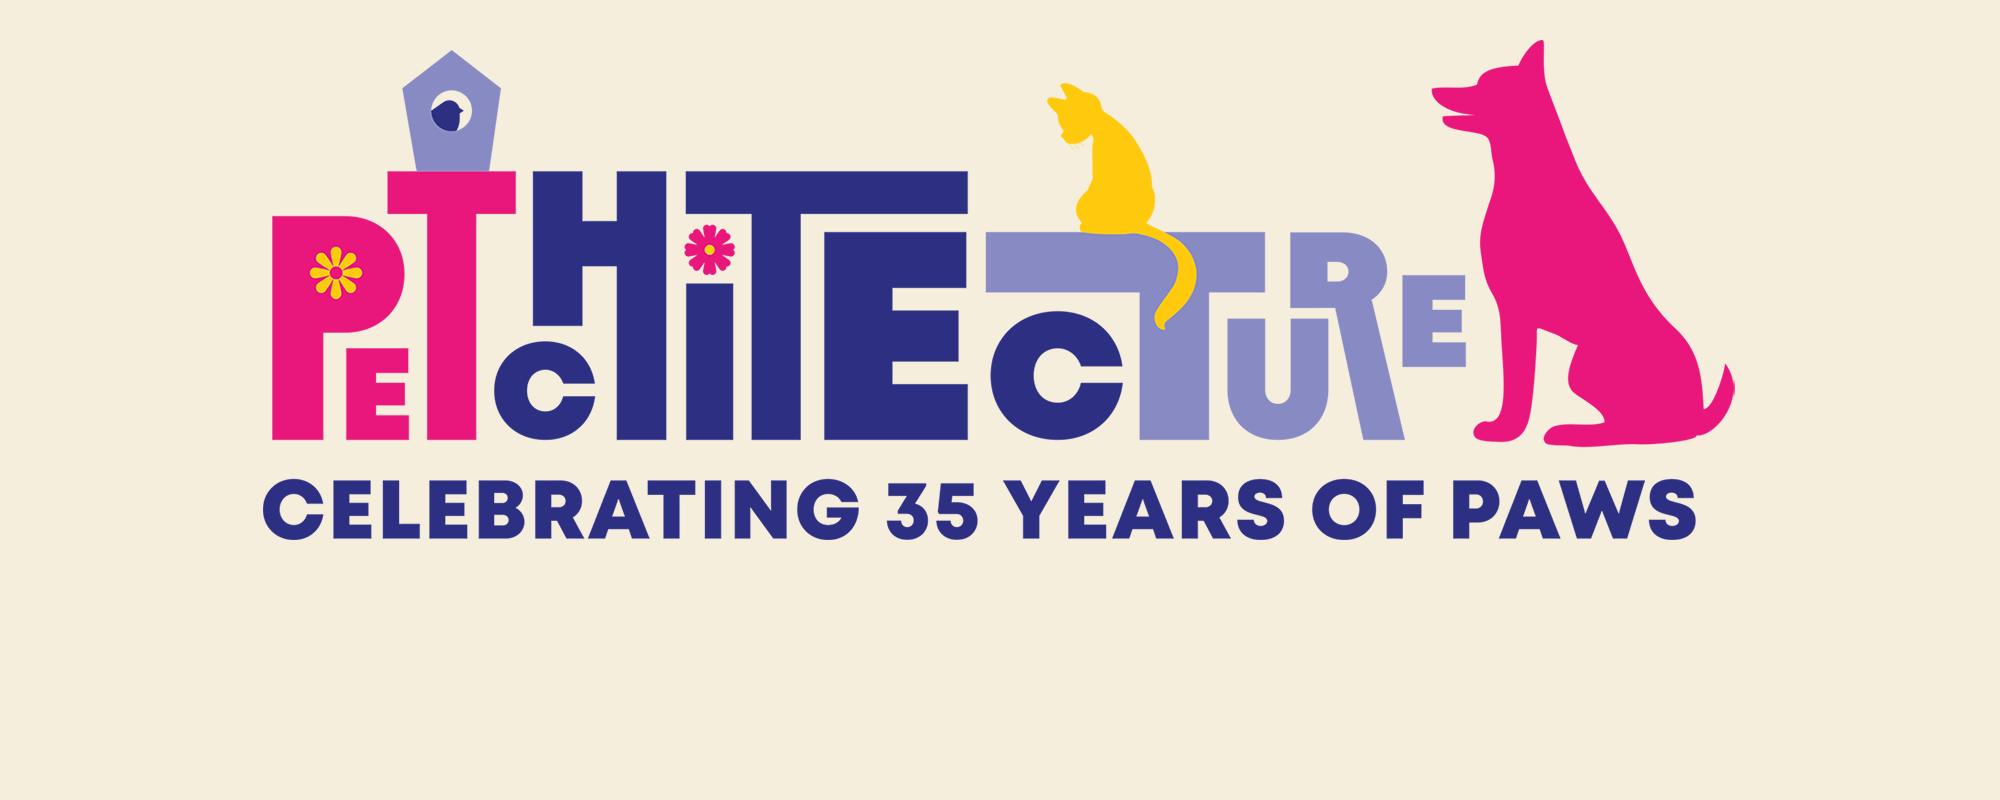 Petchitecture | Celebrating 35 Years of PAWS